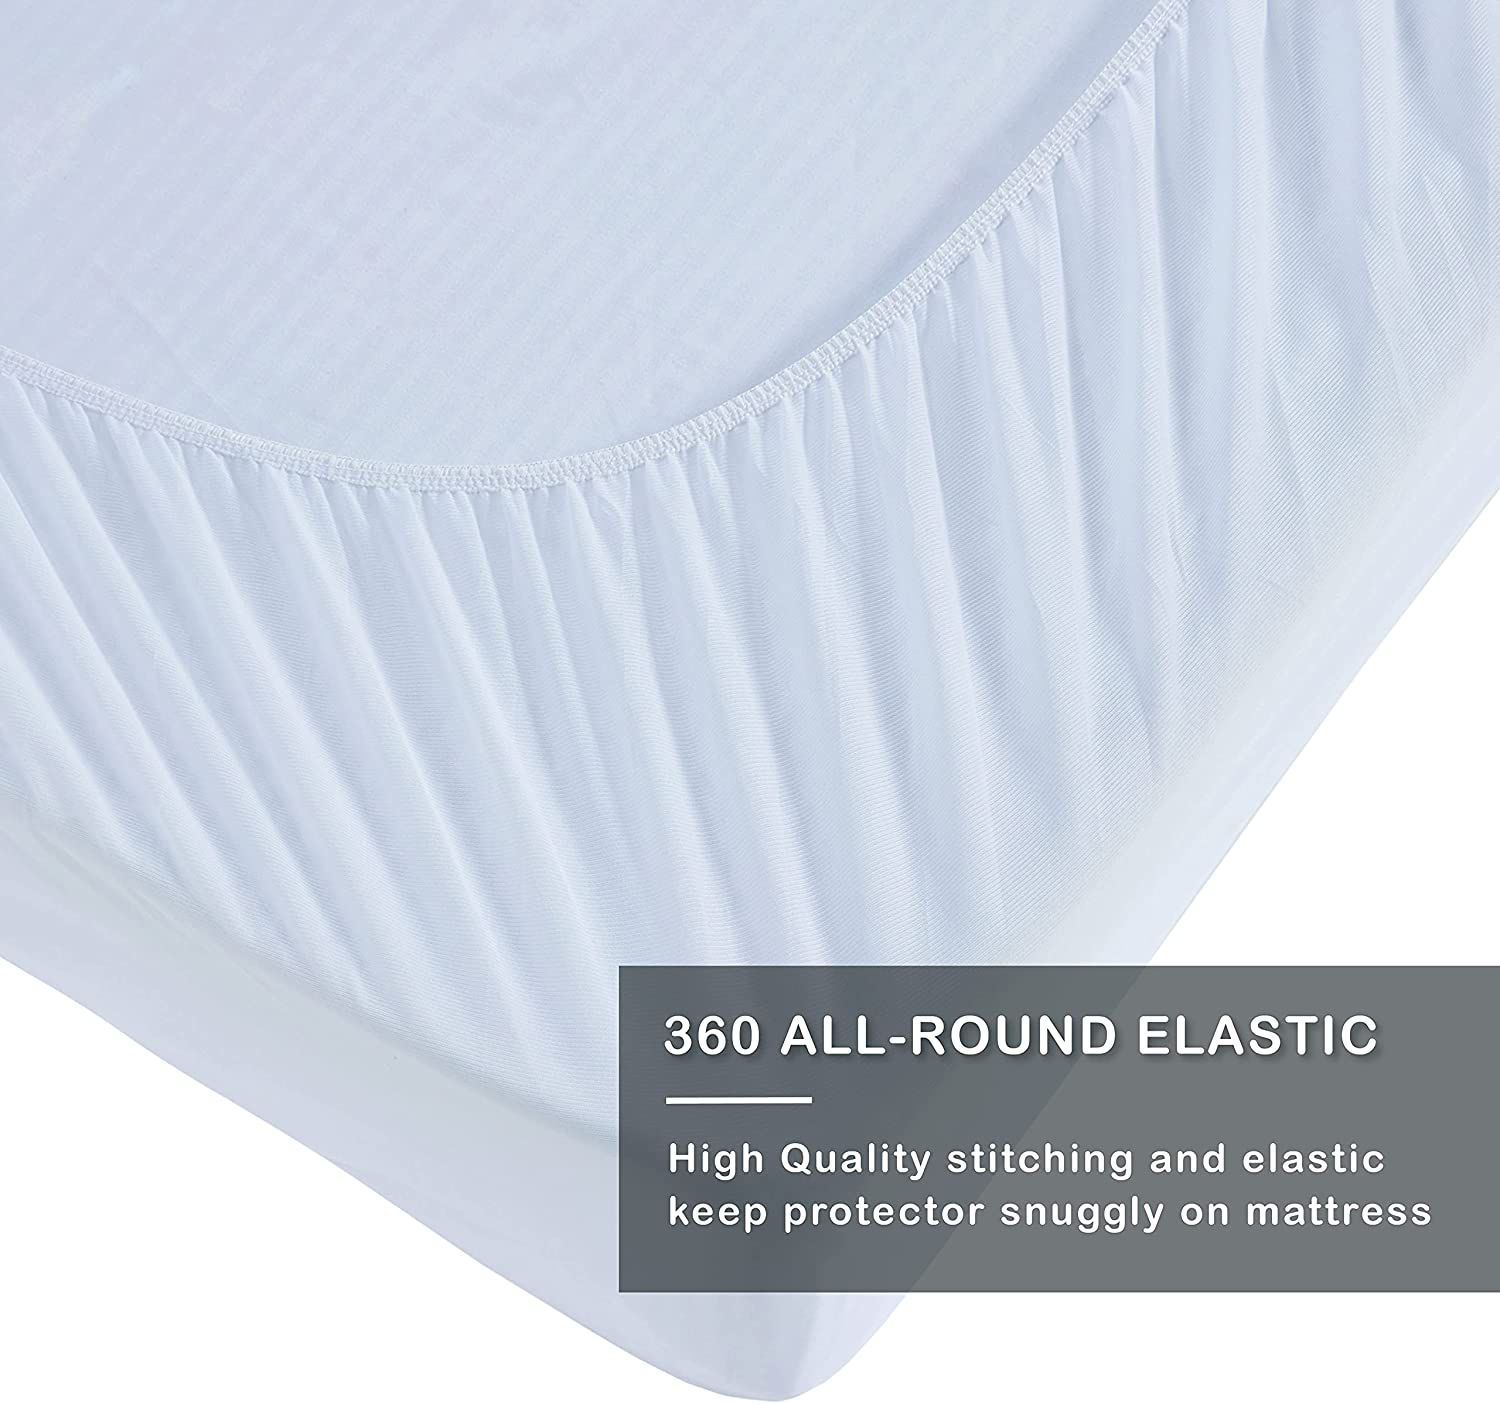 Degrees of Comfort Premium Soft Waterproof Mattress Pad Twin XL Size | Quilted Topper Fitted 13'' Inch Deep Pocket 3M Scotchgard Stain Resistant Protector Cover | Cooling, Washable, Breathable